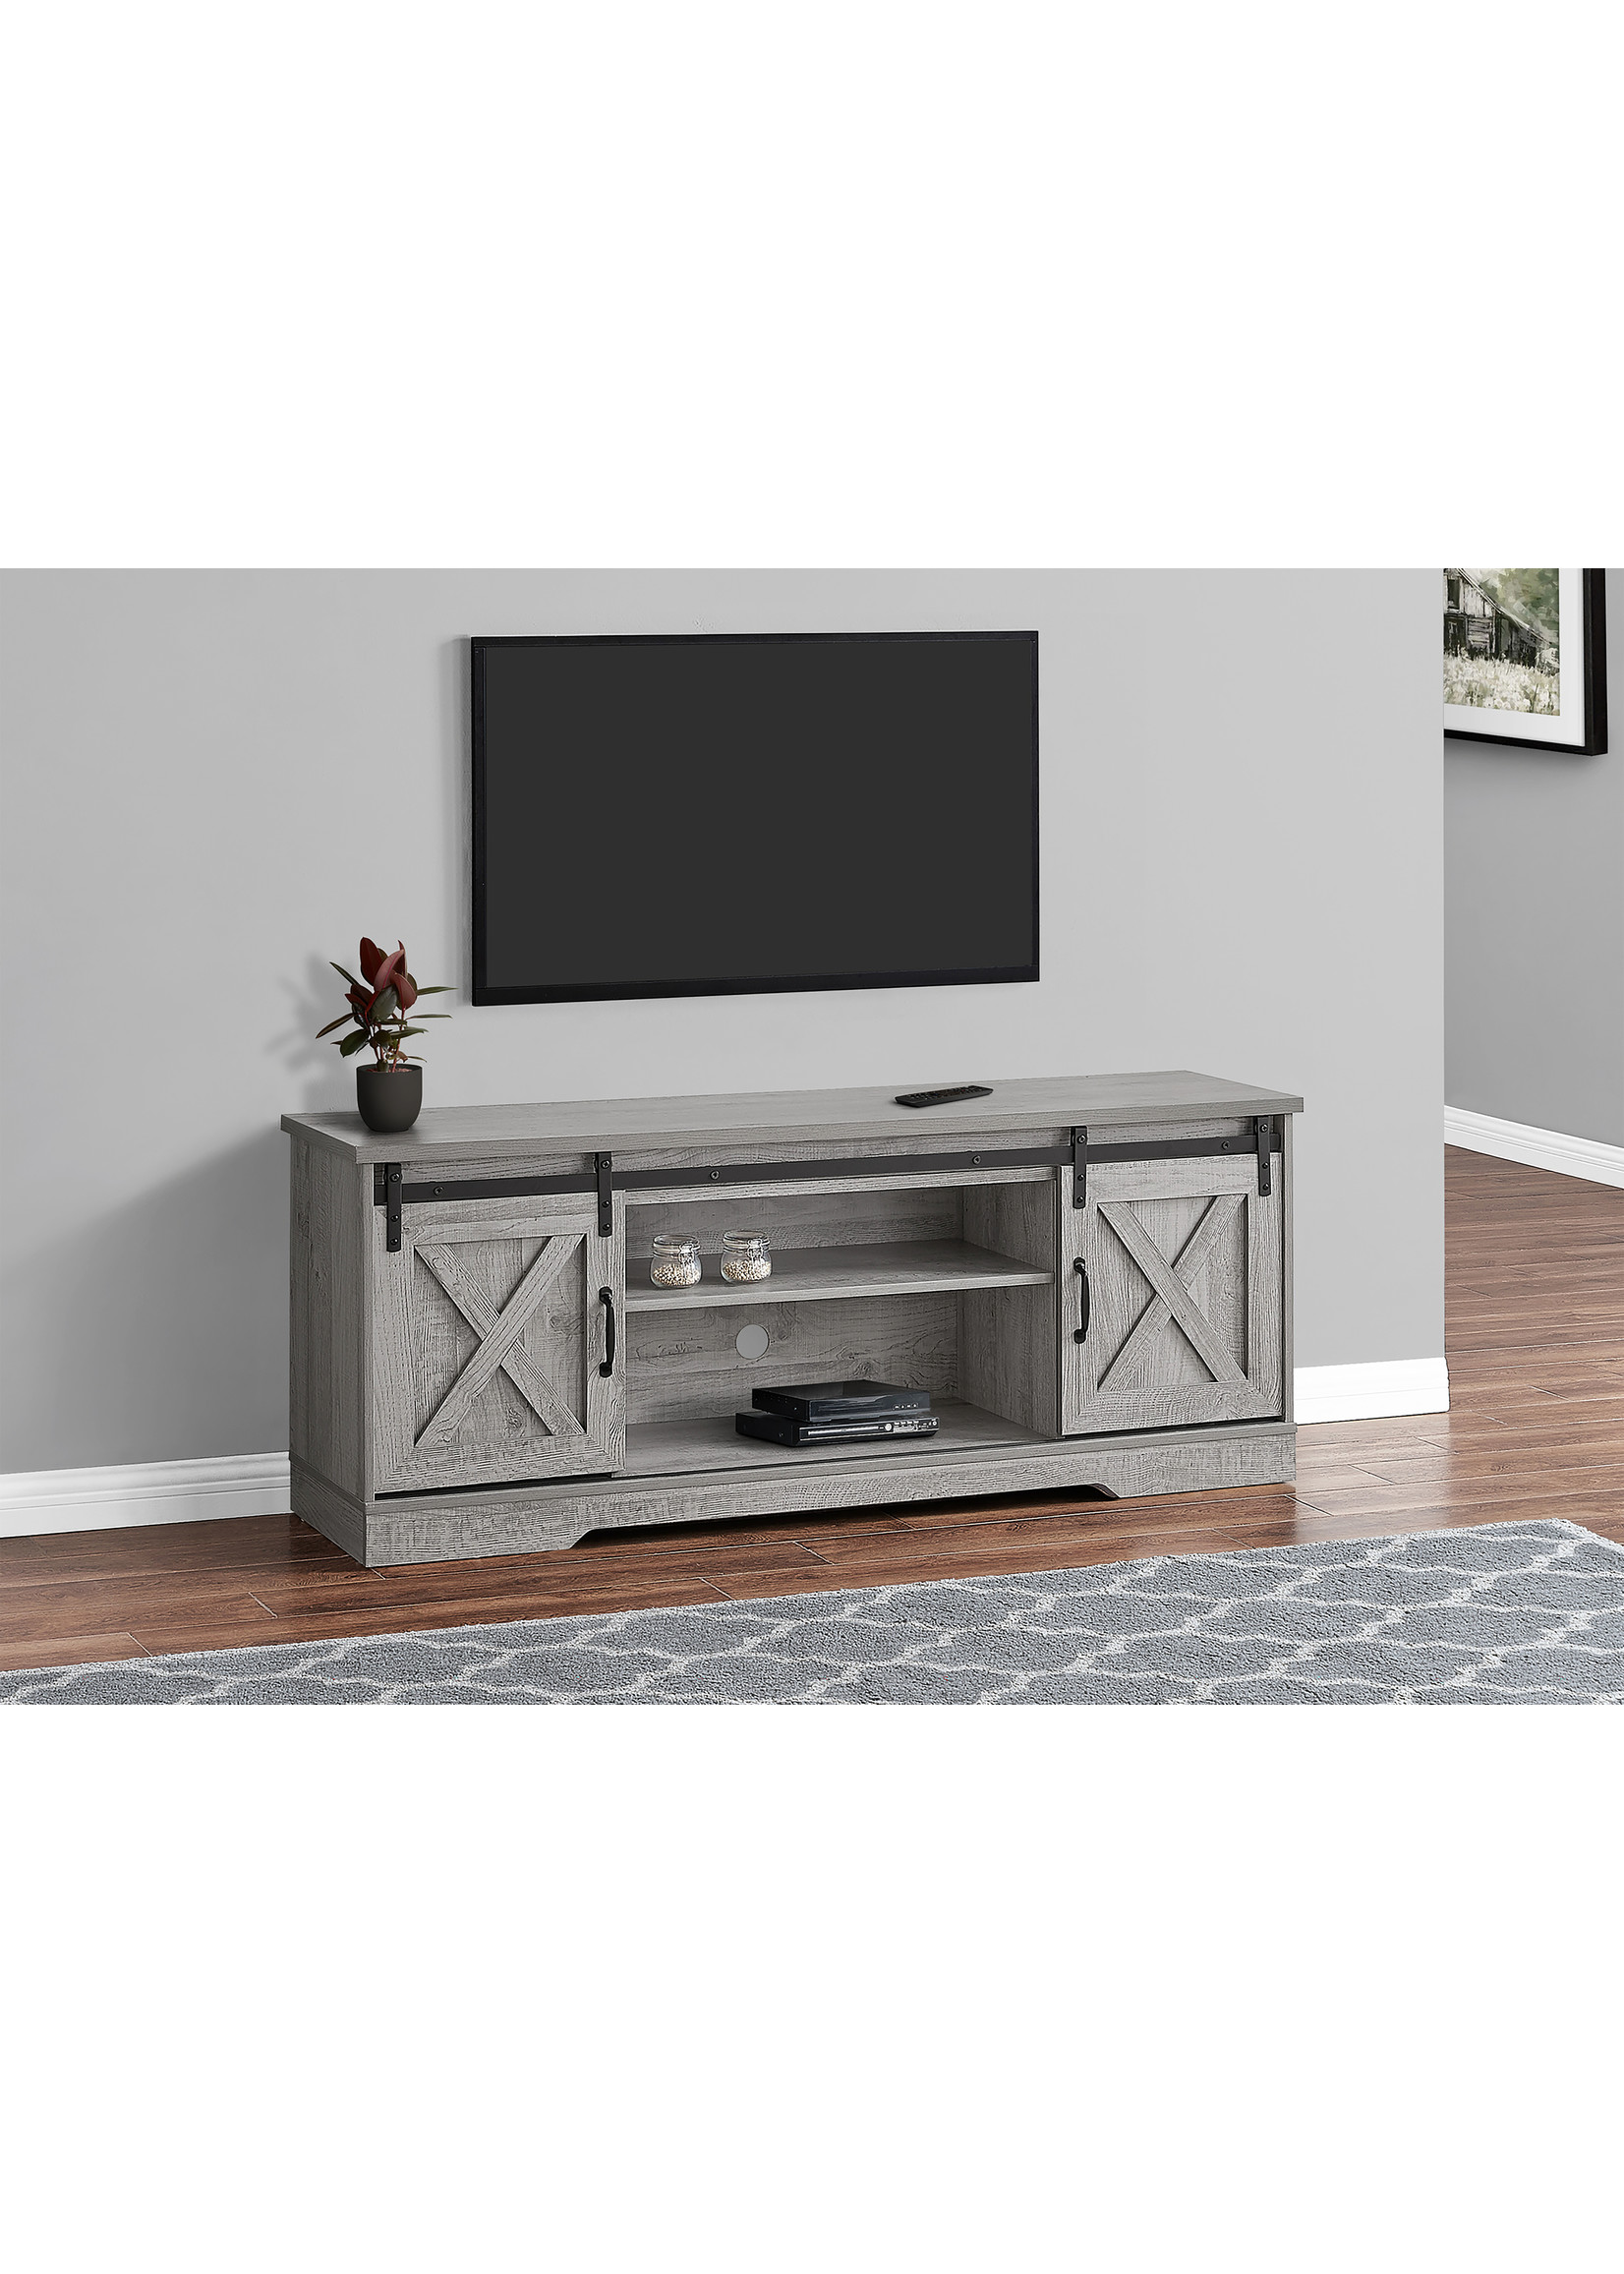 TV STAND - 60"L / Grey With 2 Sliding Doors